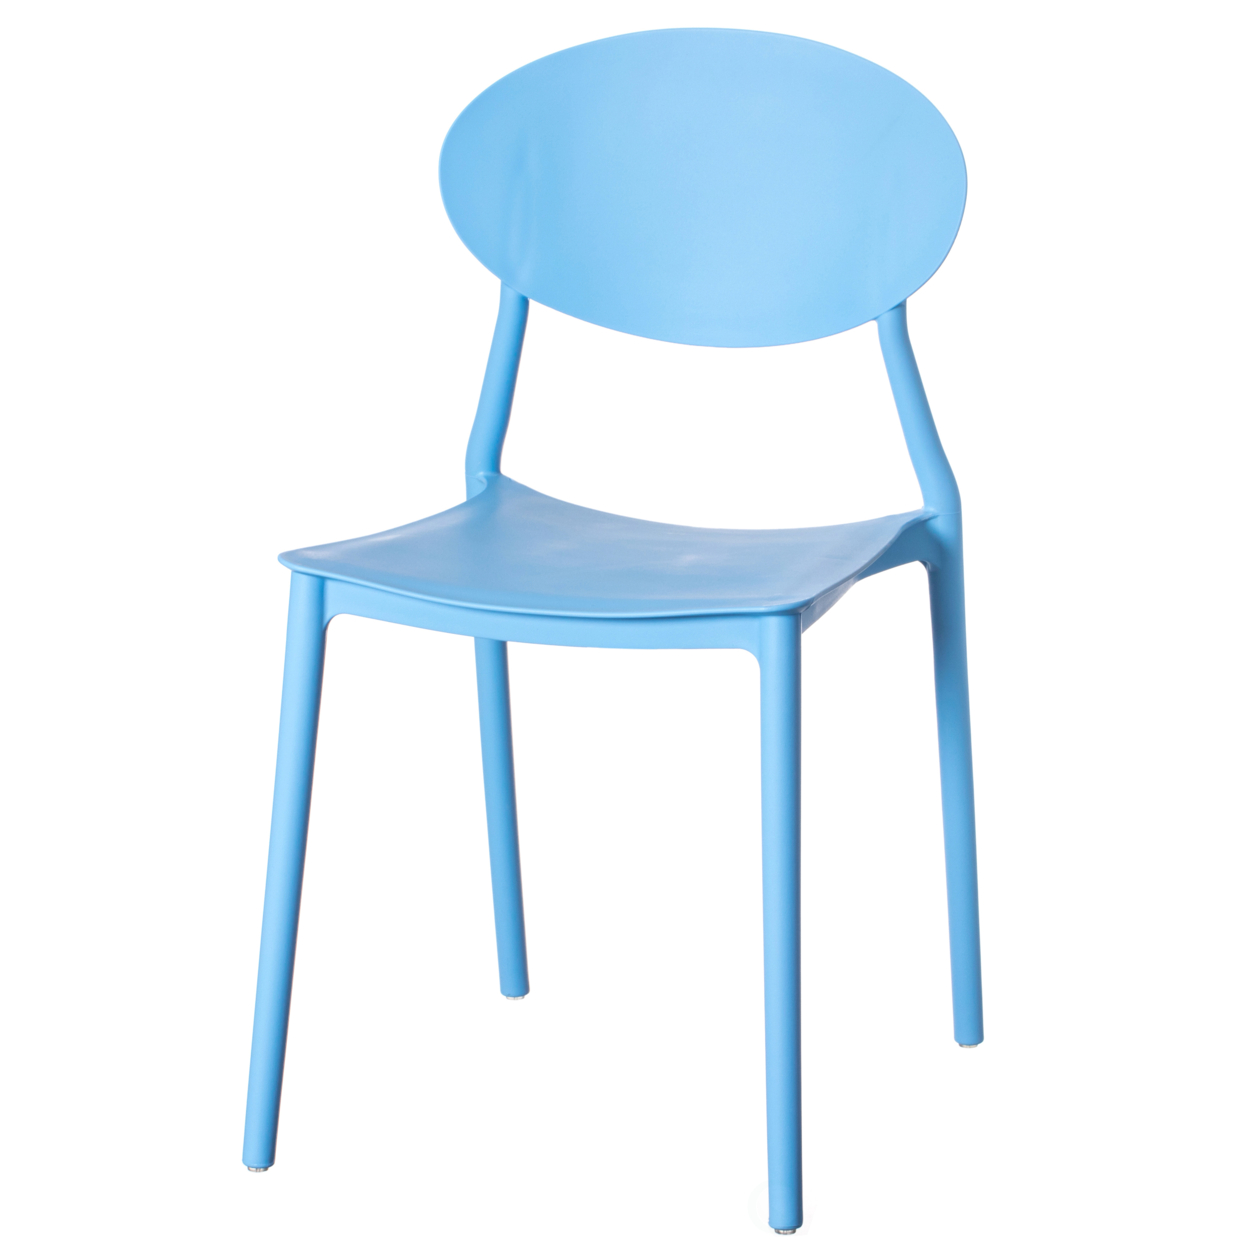 Modern Plastic Outdoor Dining Chair With Open Oval Back Design - Set Of 4 Blue